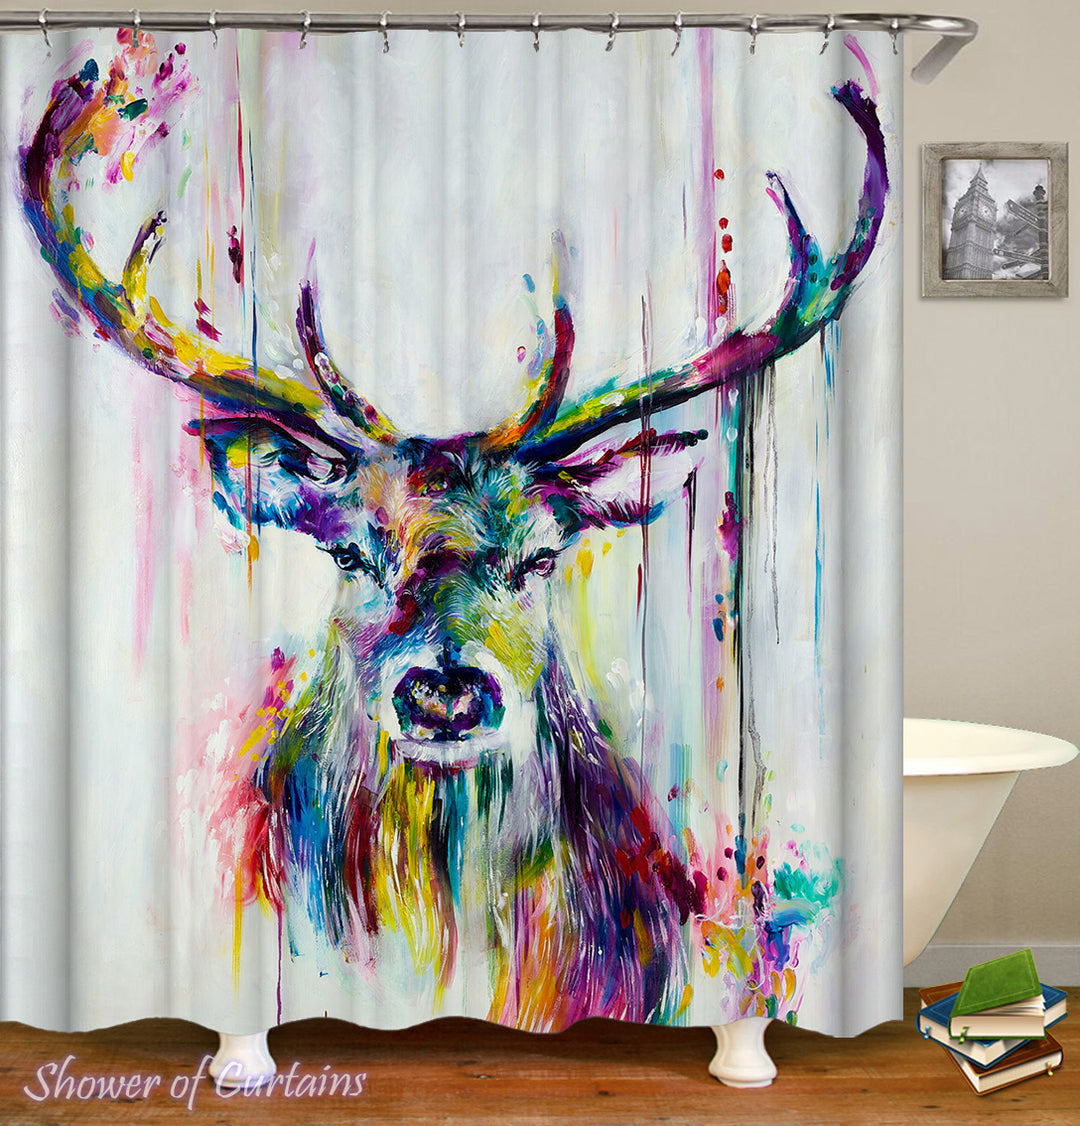 Art colorful shower curtains - Colorful Deer Painting